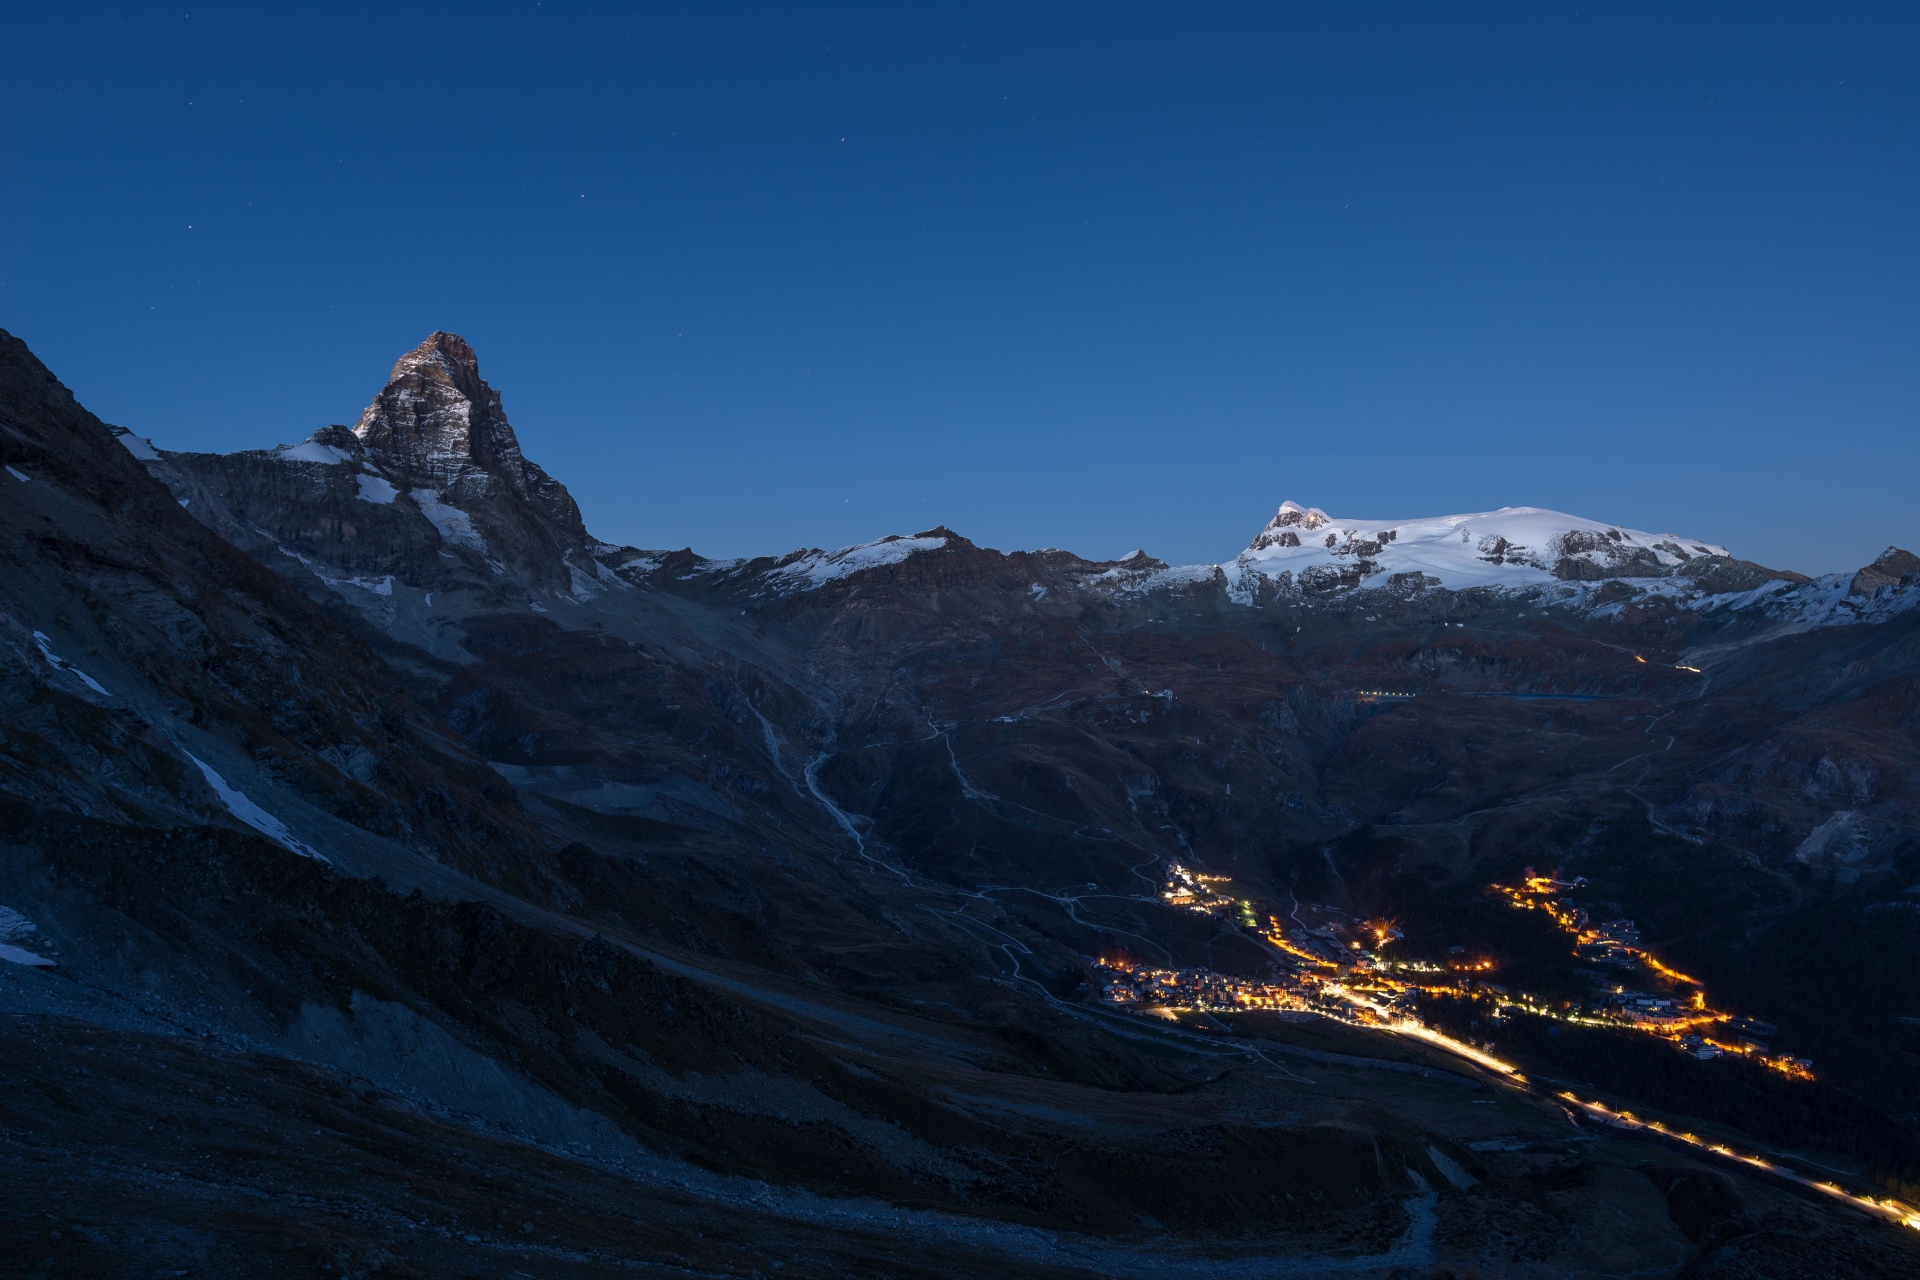 Aerial view of Breuil Cervinia village glowing in the night, famous ski resort in Aosta Valley, Italy. Wonderful starry sky over Matterhorn (Cervino) mountain peak and Monte Rosa glaciers.